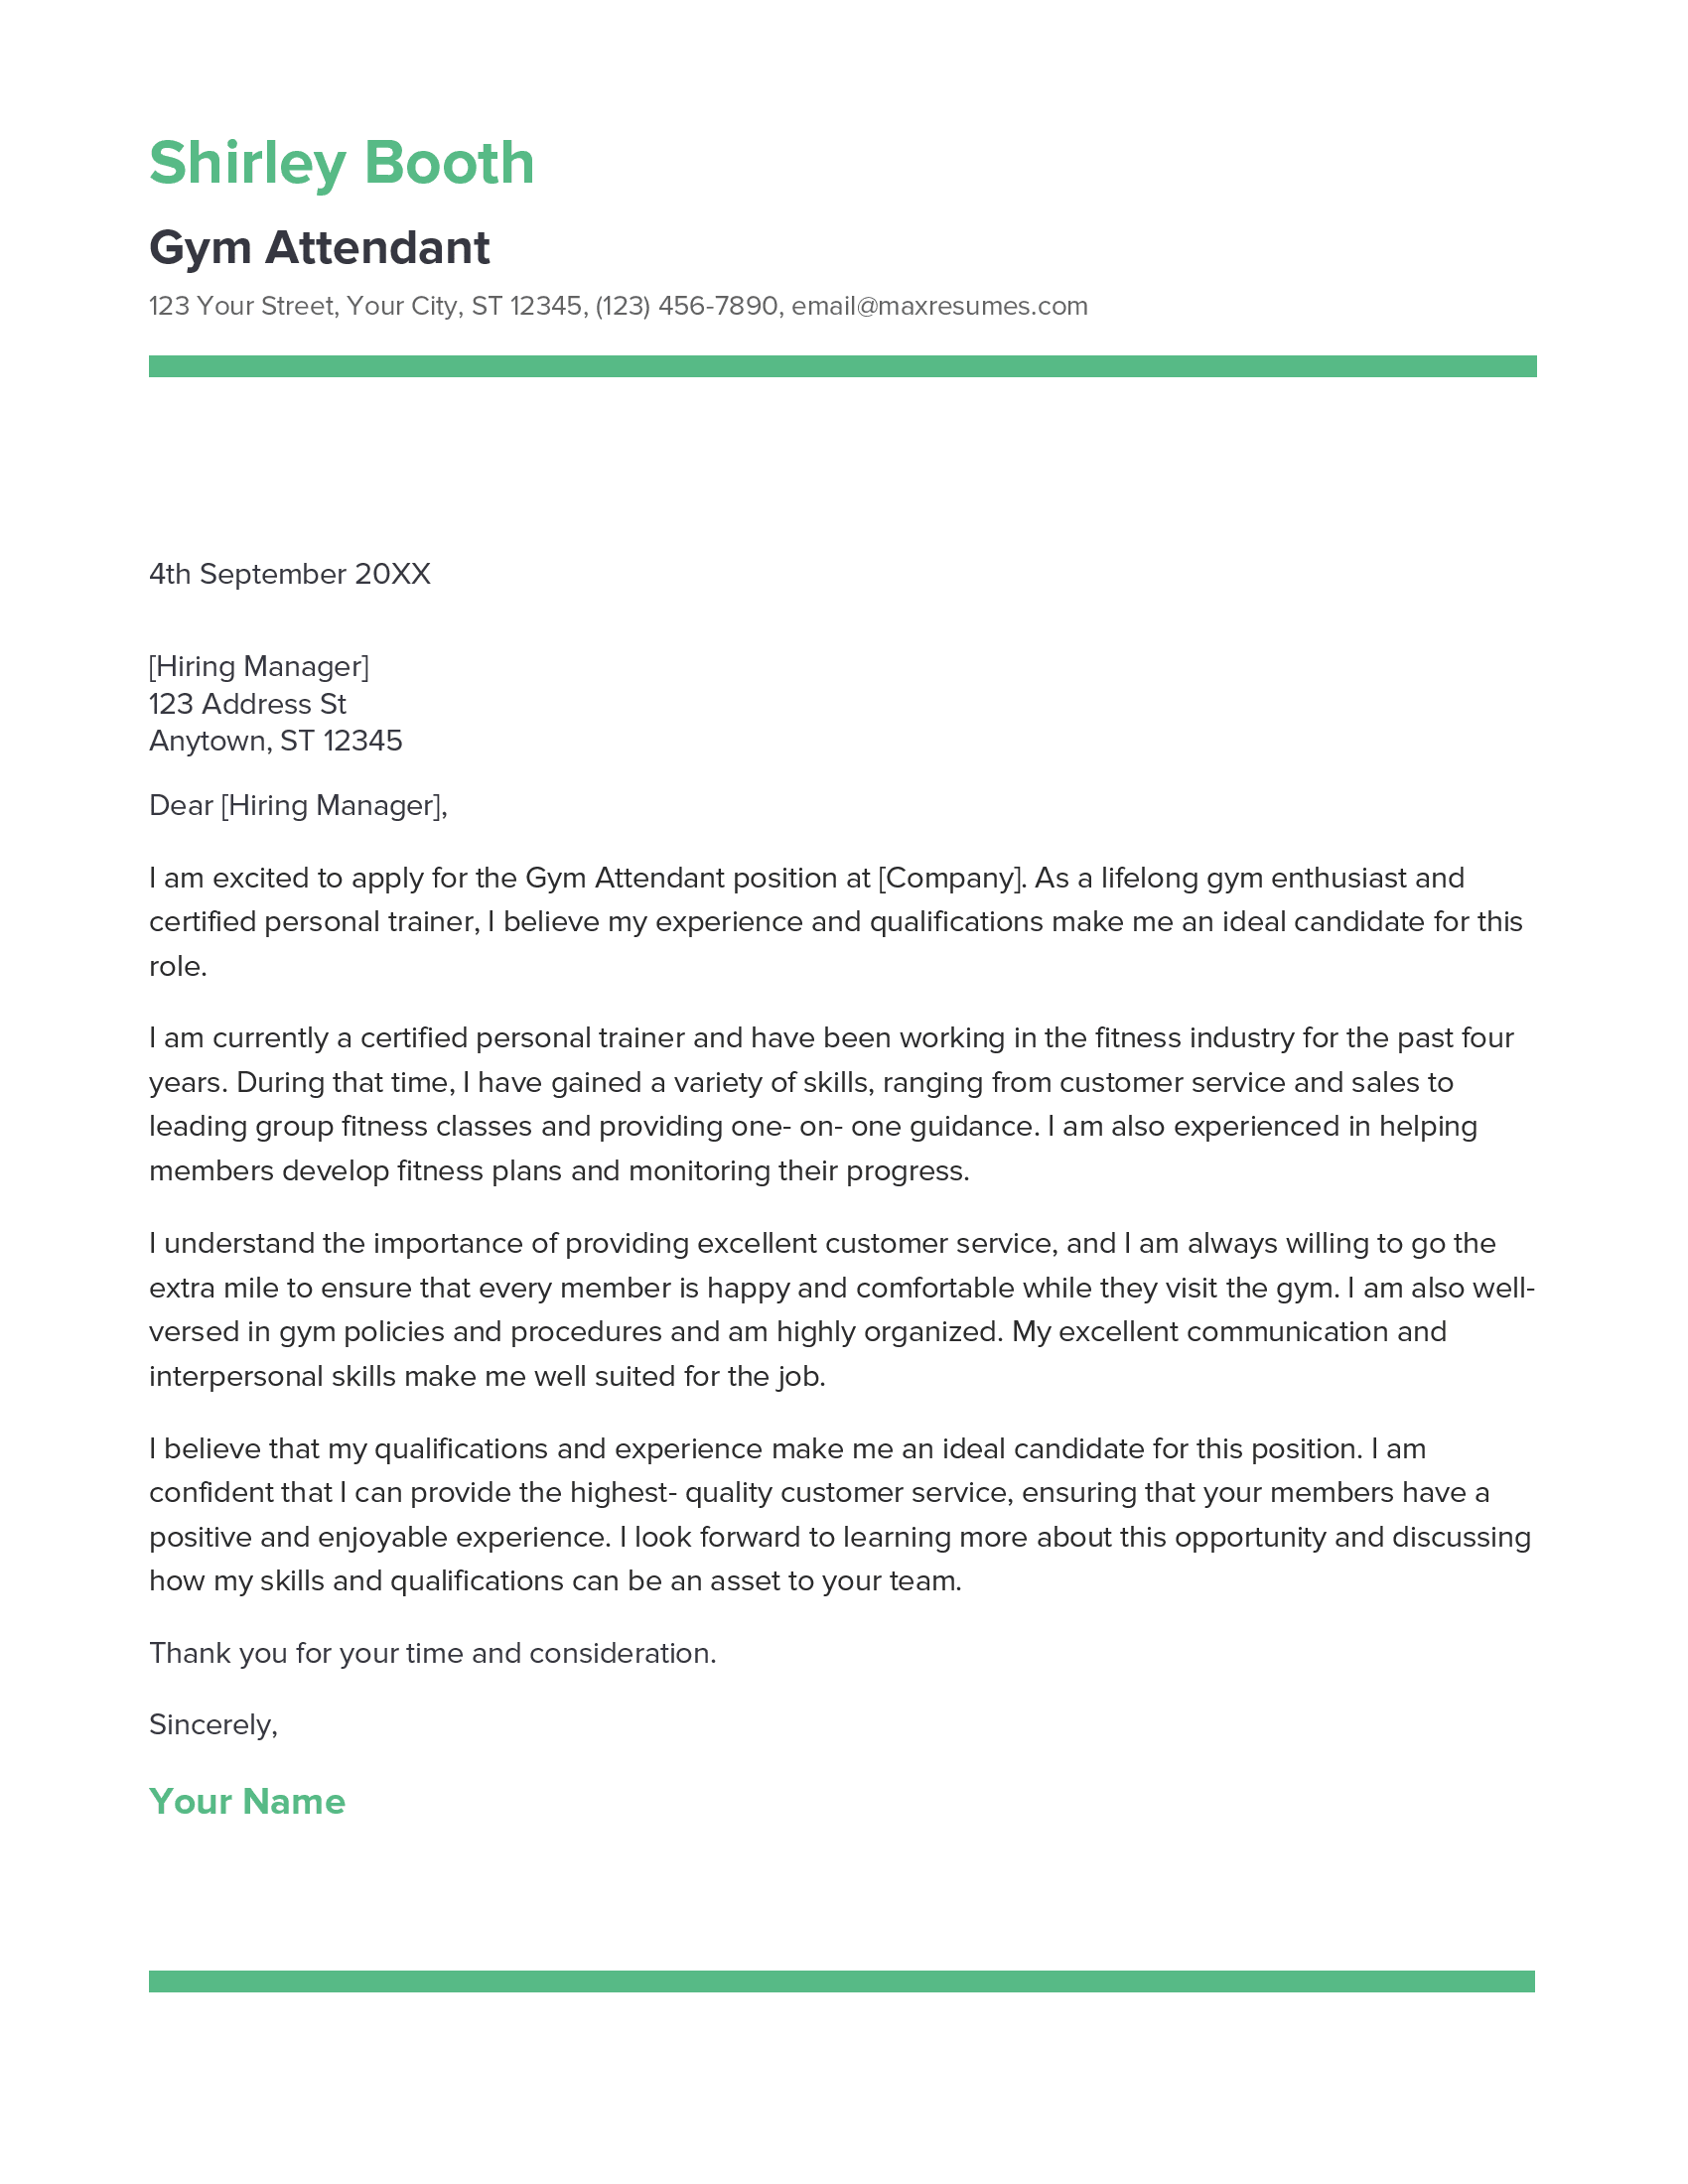 Gym Attendant Cover Letter Example